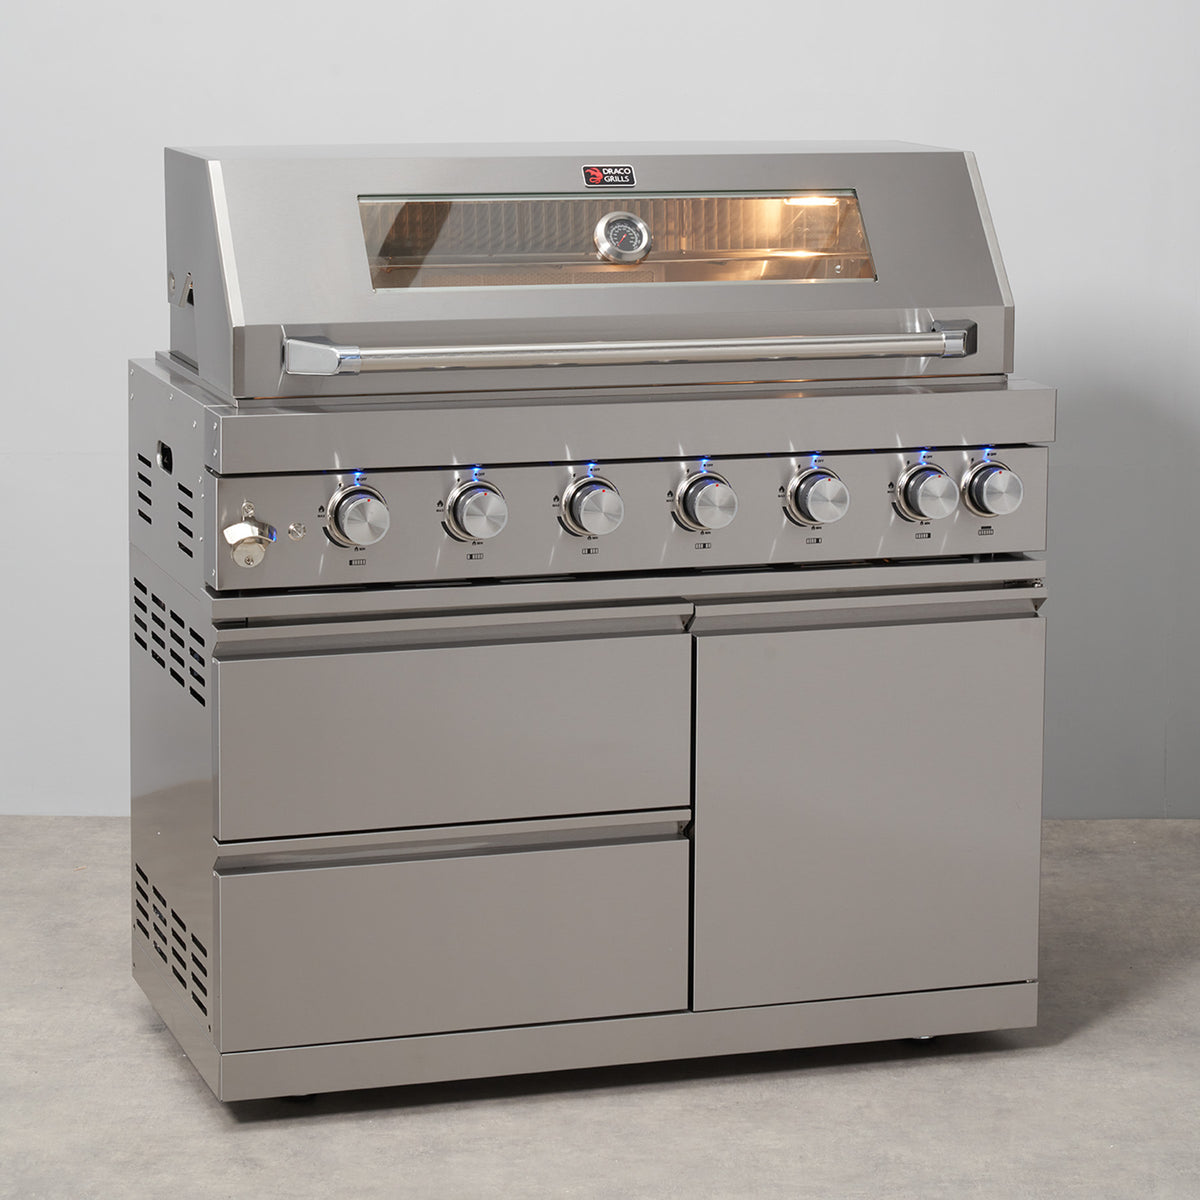 Draco Grills 6 Burner BBQ Modular Outdoor Kitchen with Sear Station and Double Fridge Unit